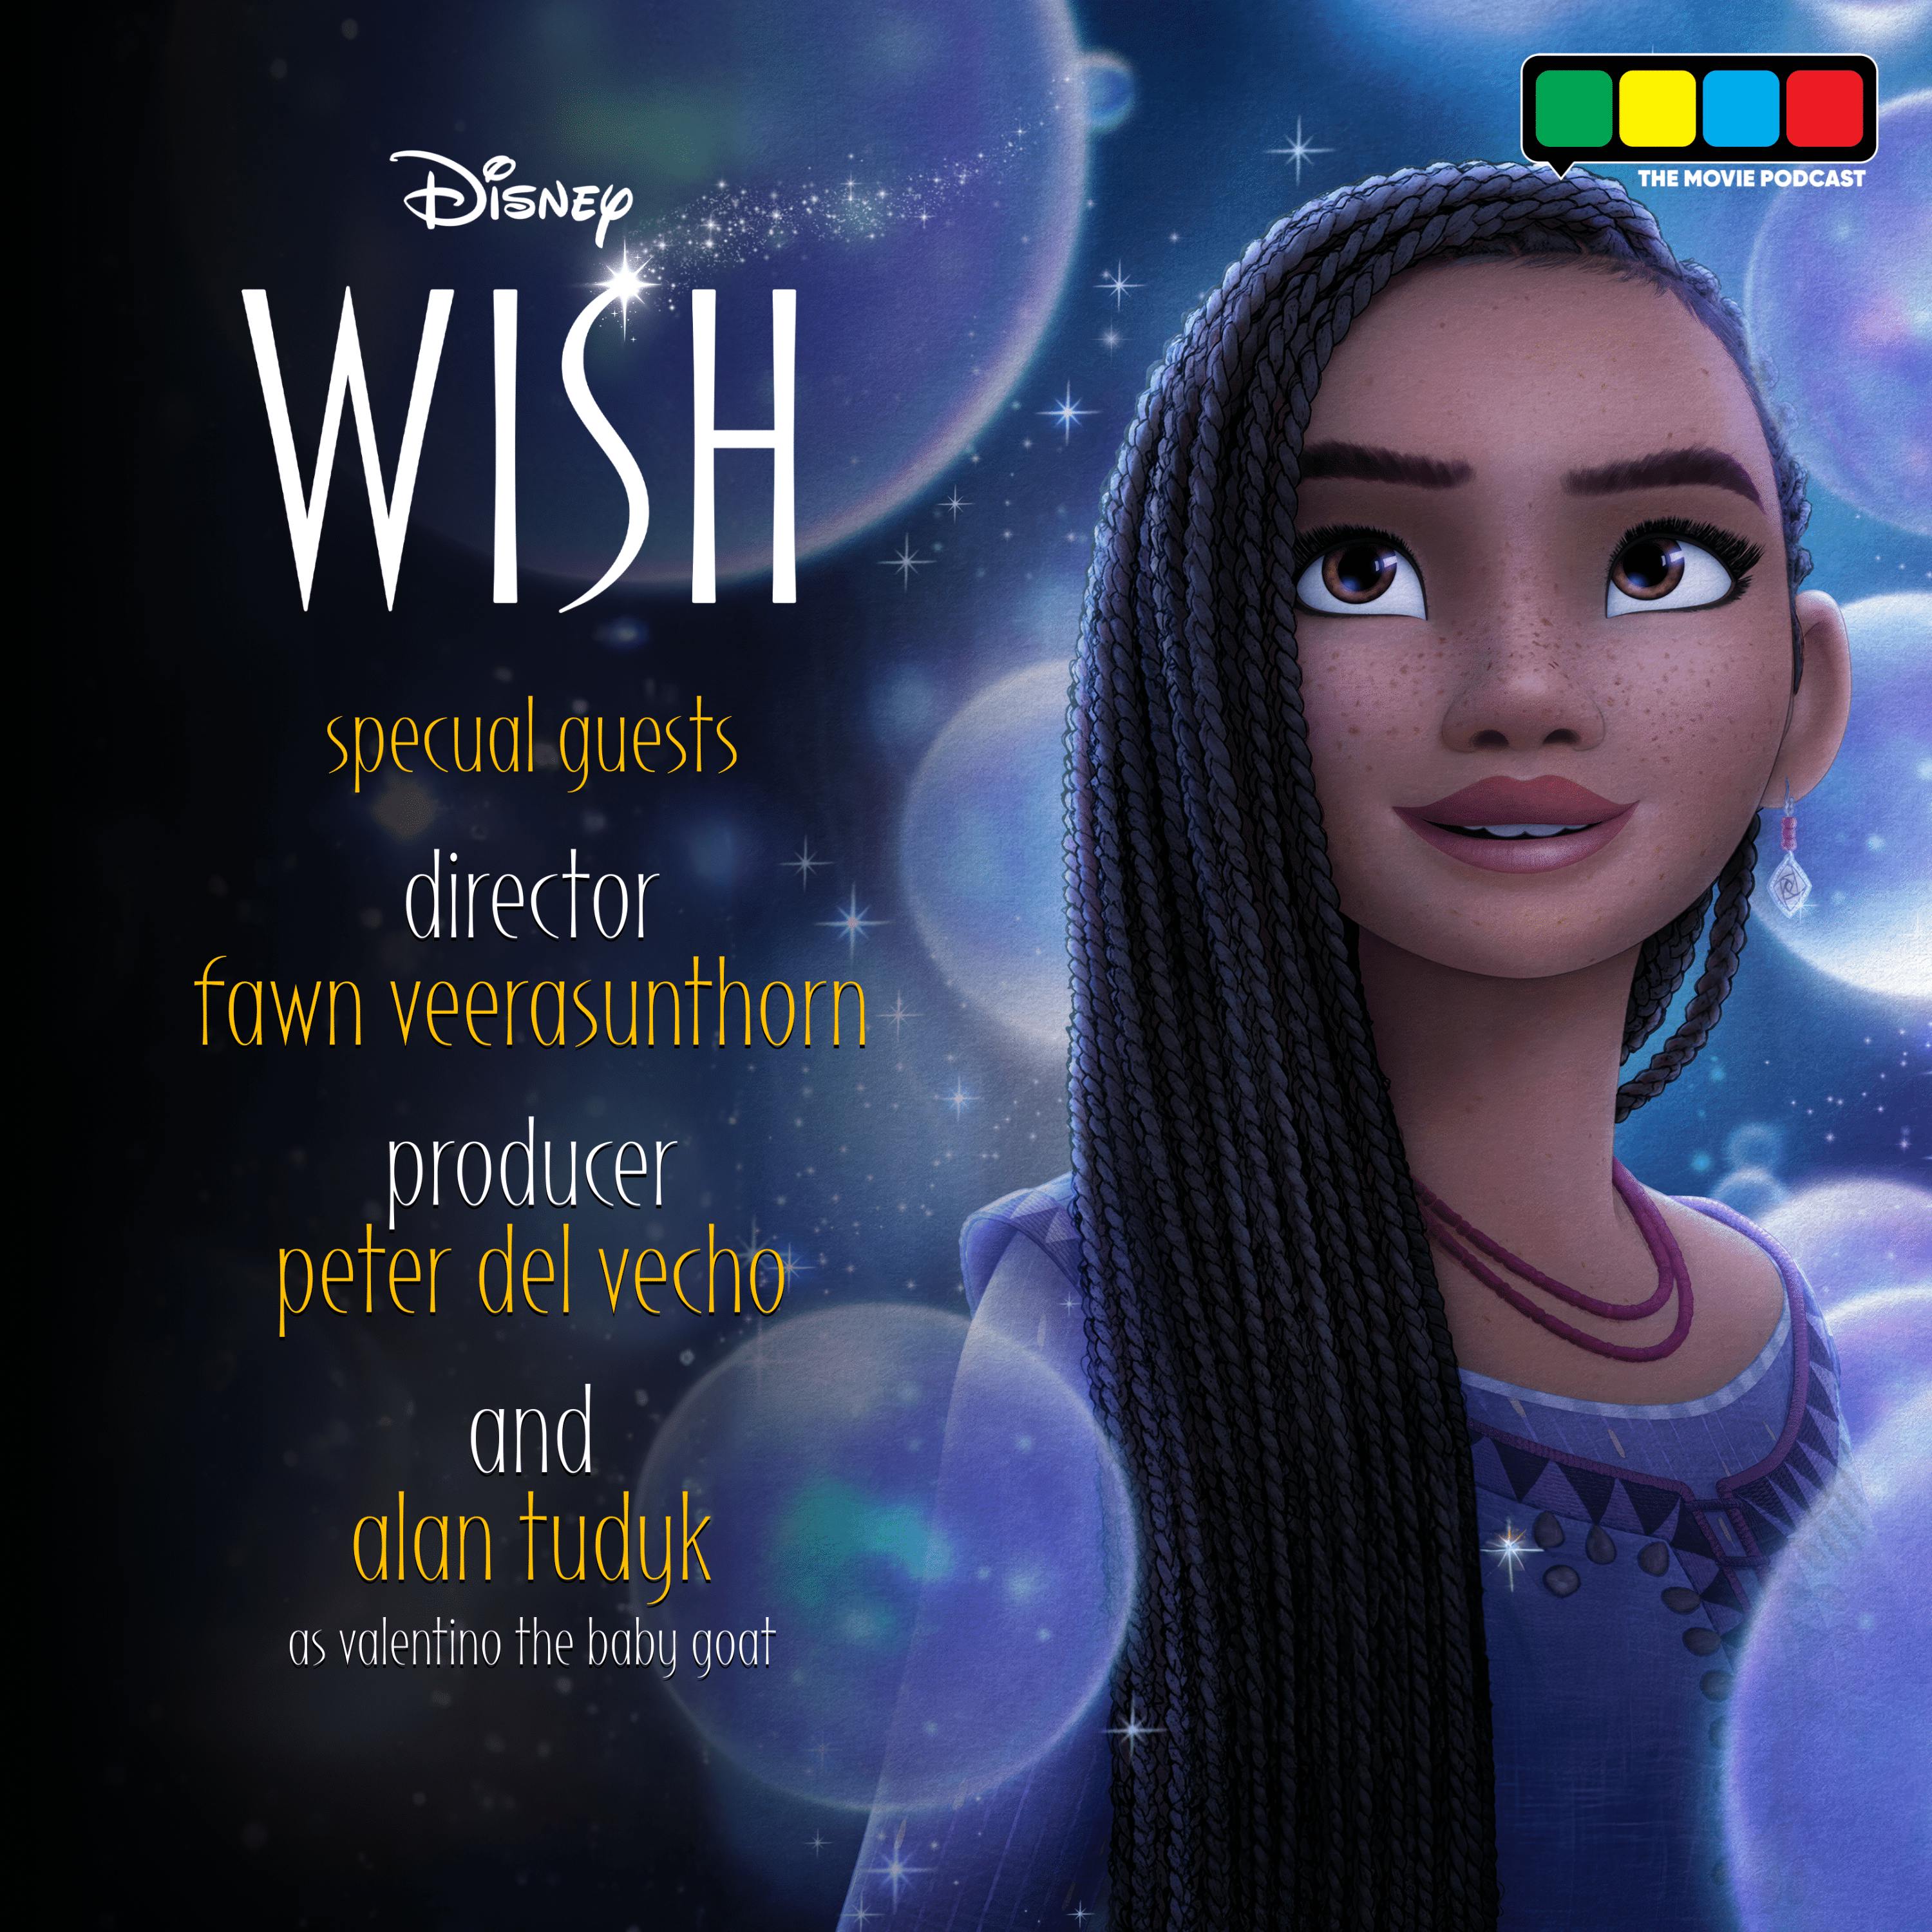 Disney’s Wish Interview with Alan Tudyk, Director Fawn Veerasunthorn, and Producer Peter Del Vecho